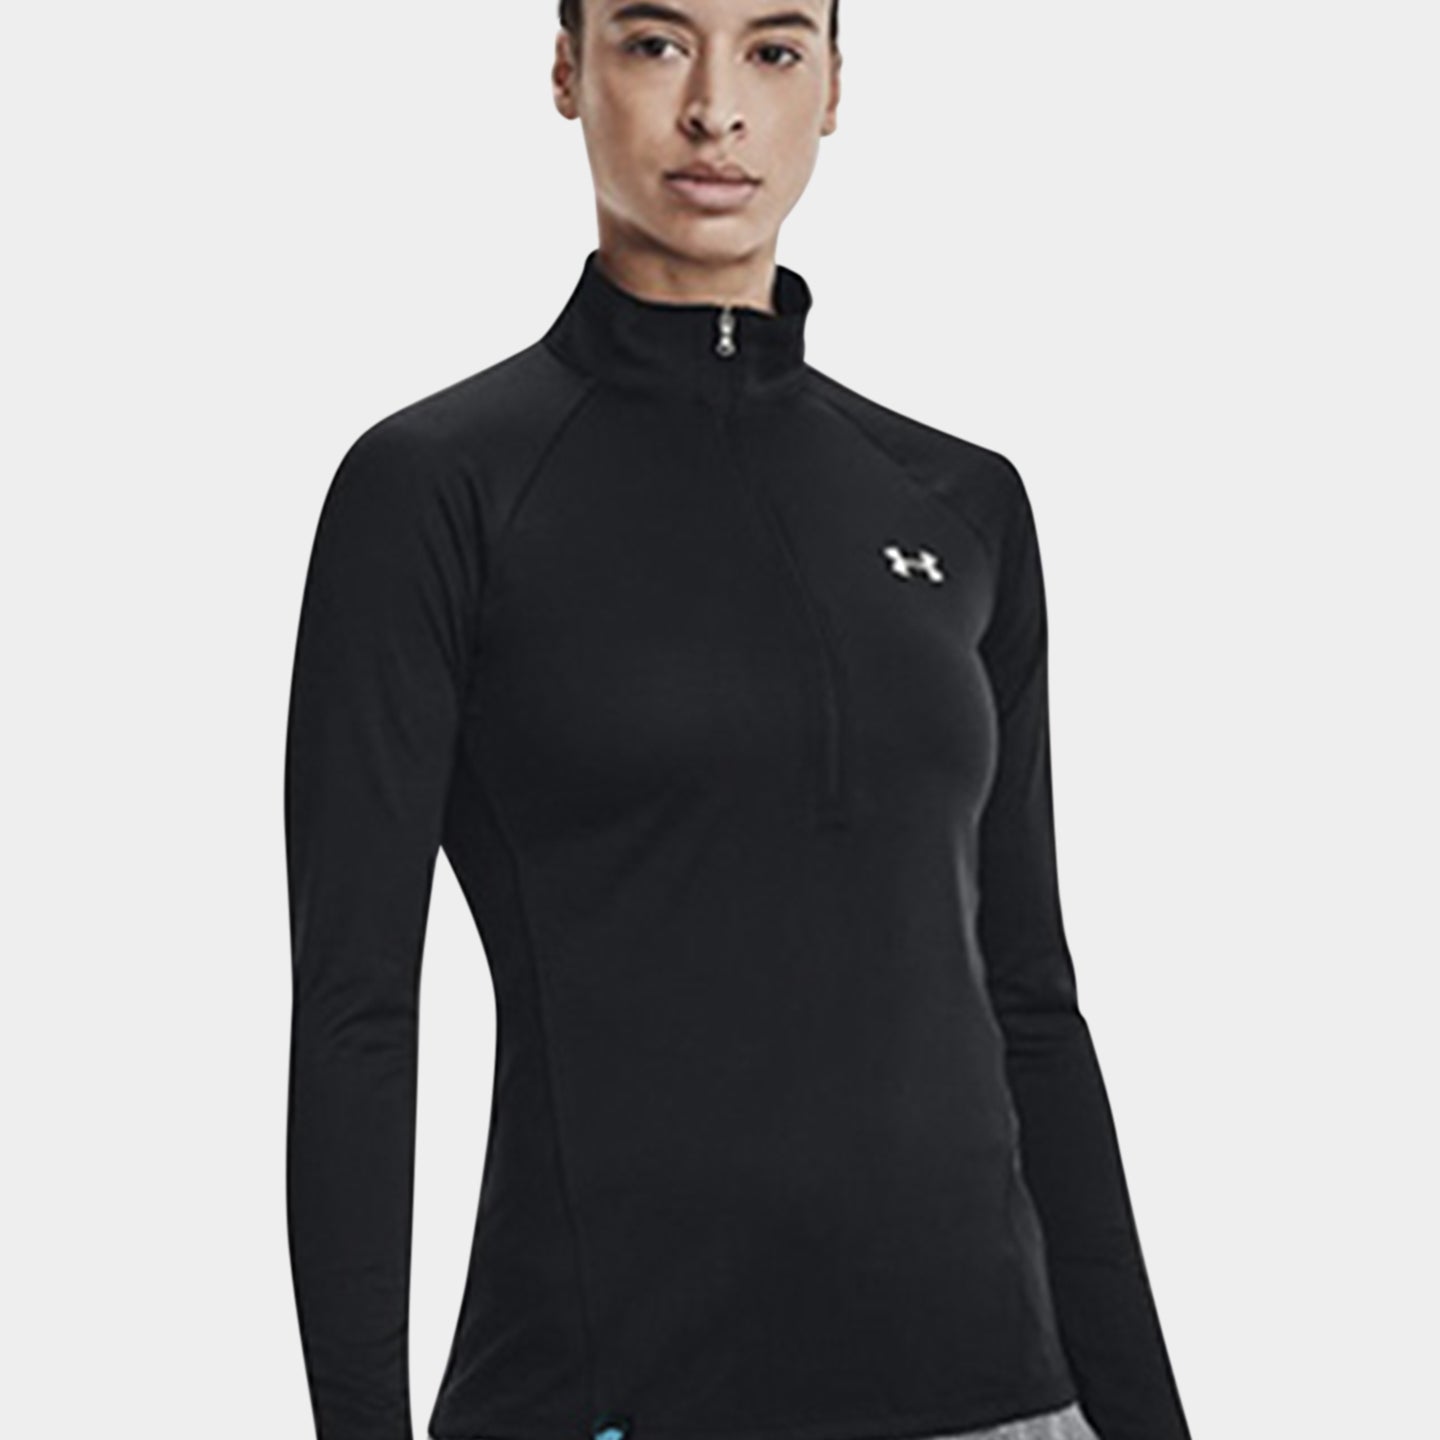 Under Armour Under Armour Women���s UA Tech��� 1/2 Zip Long Sleeve, Solid Black, Small